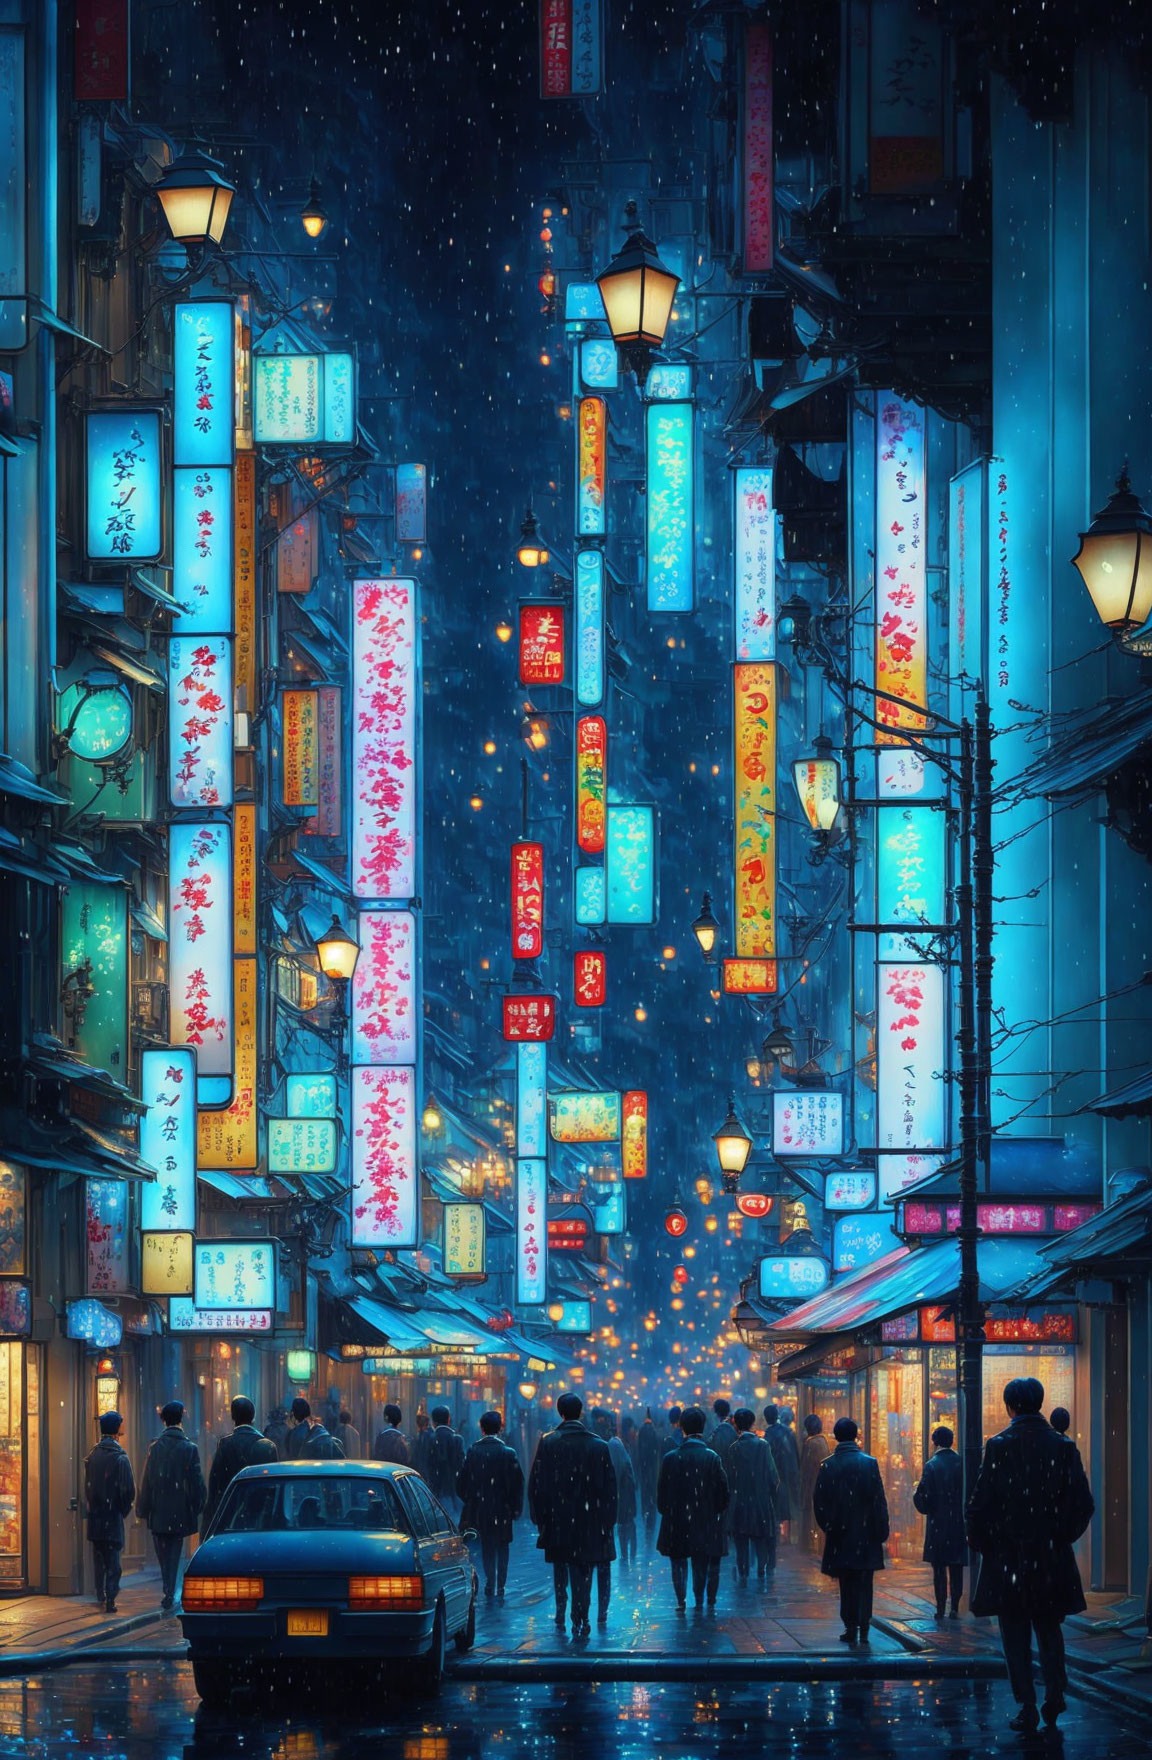 Vibrant city street at night with hanging lanterns, illuminated signs, falling snow, and pedestrians